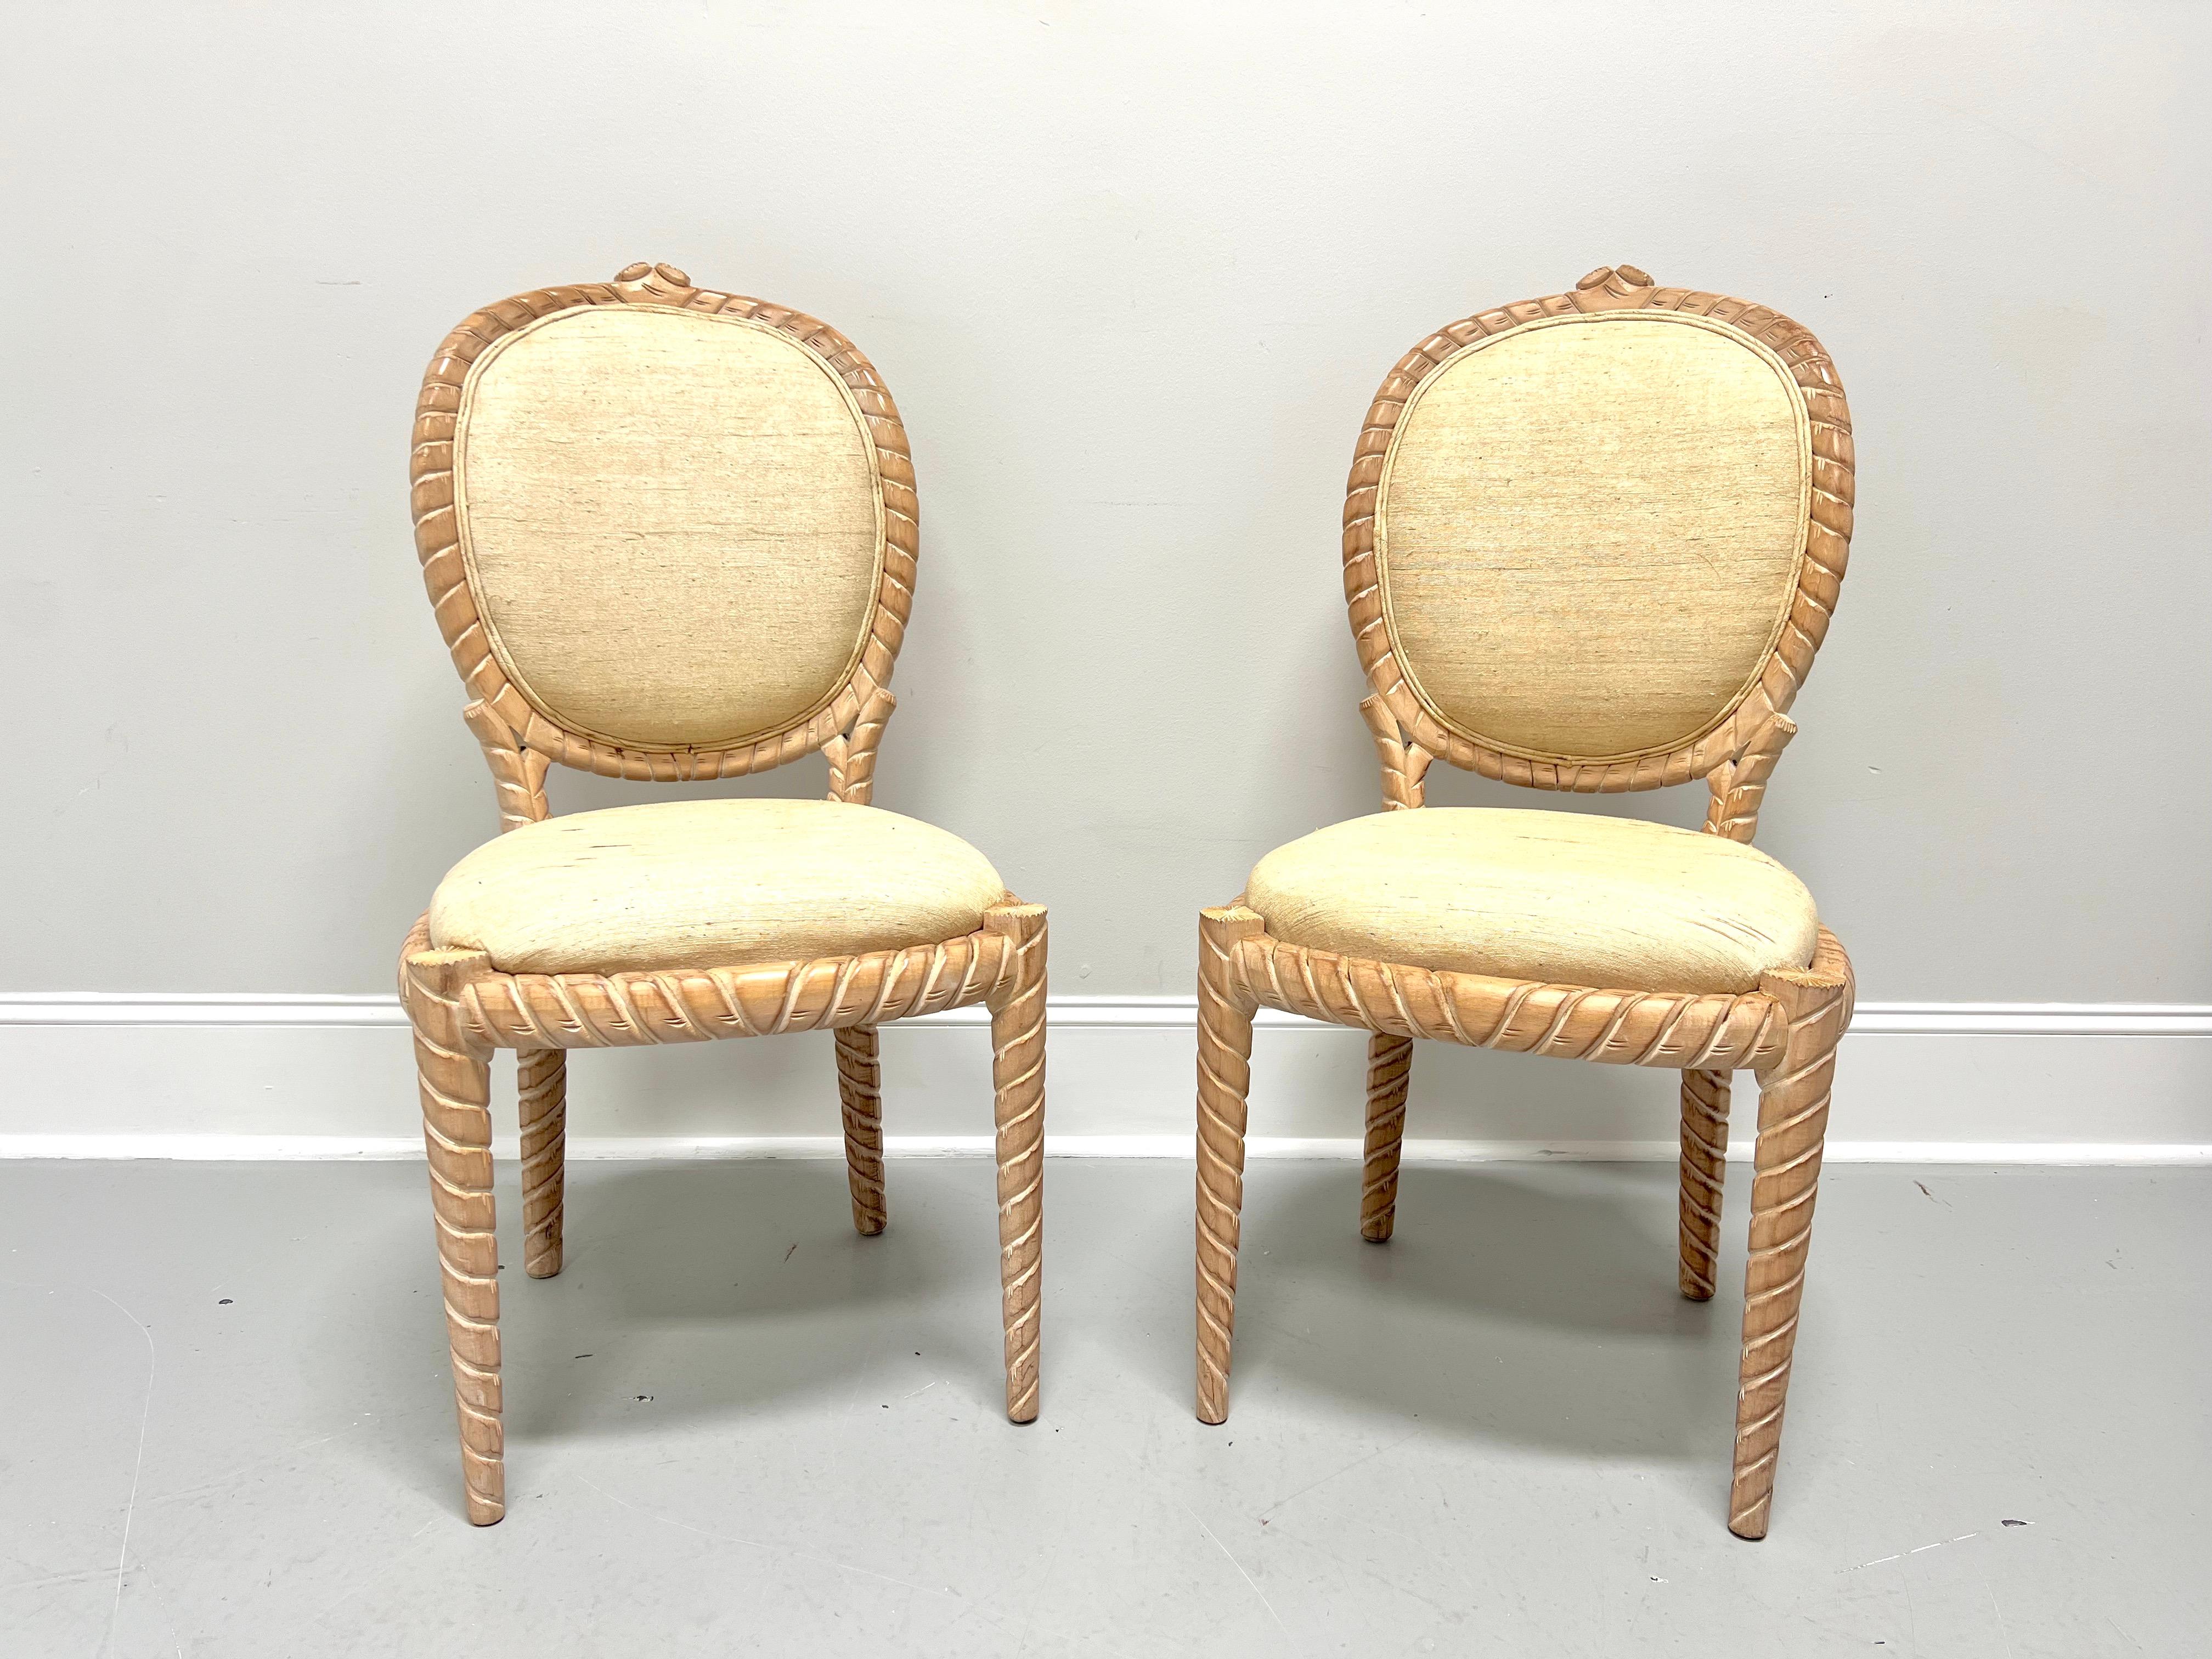 1980's Carved Whitewashed Wood Boho Rope Twist Dining Side Chairs - Pair A For Sale 4